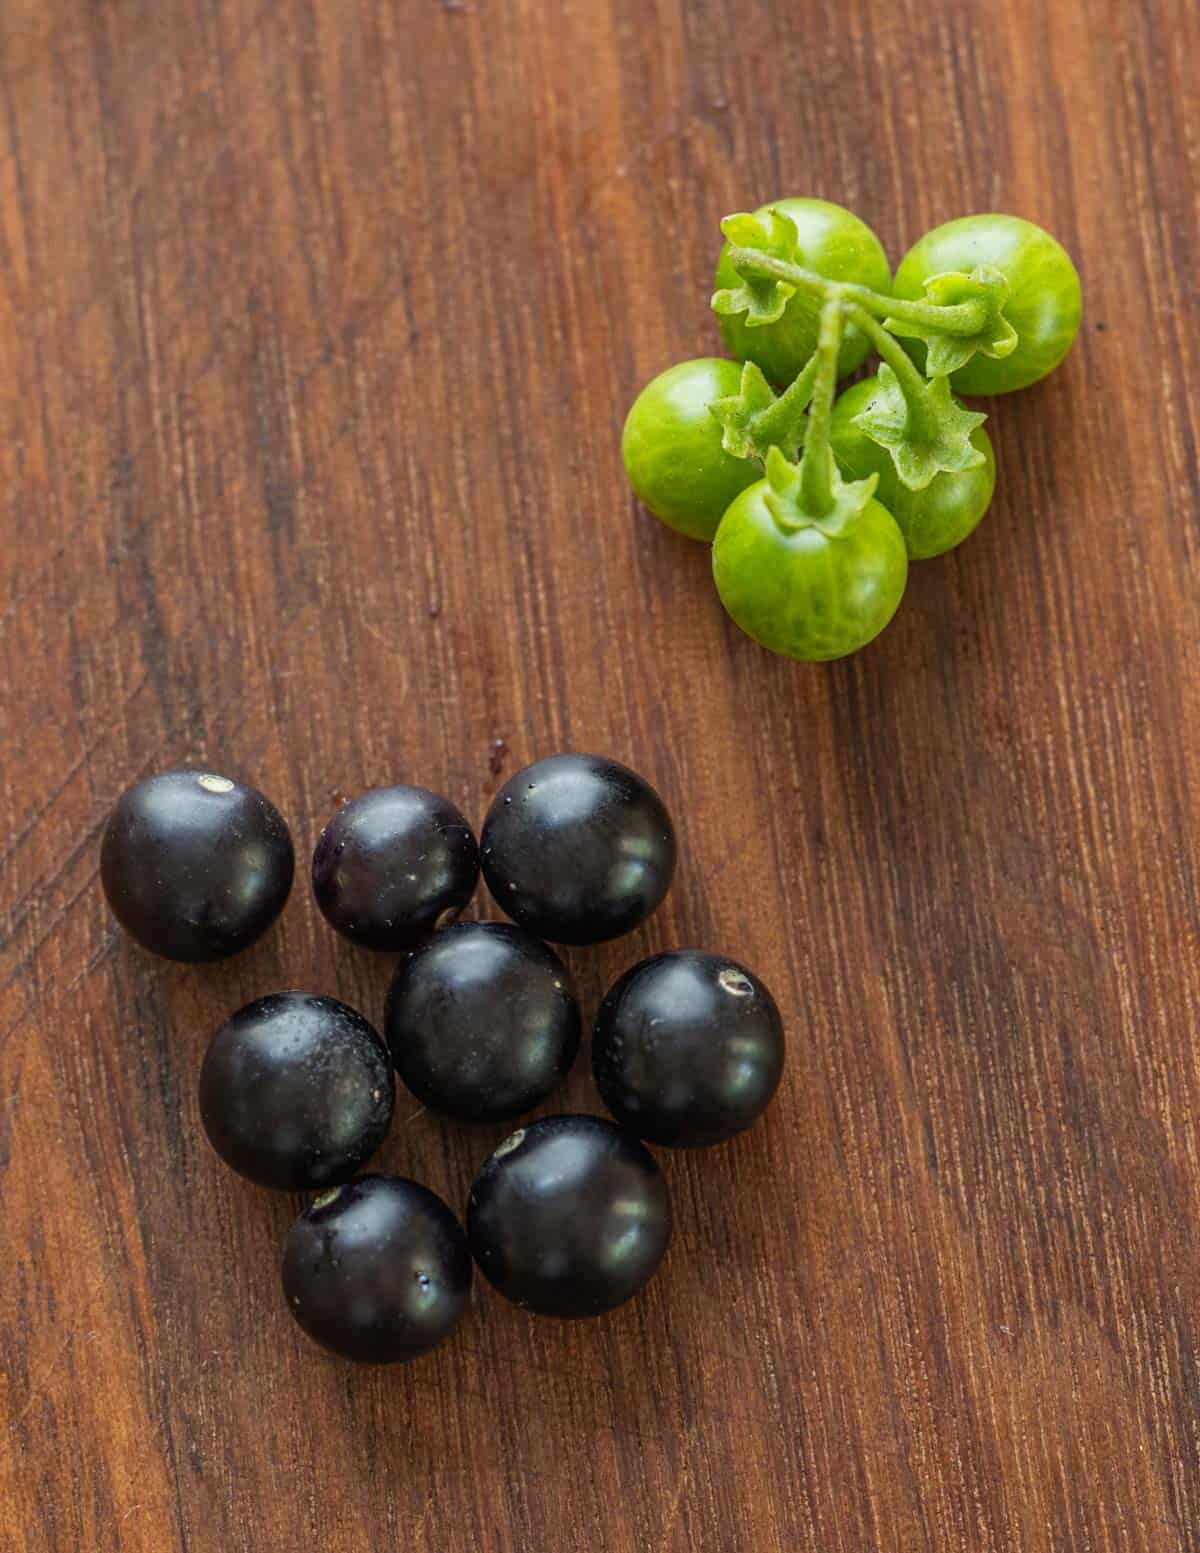 A close up image comparing ripe edible black nightshade berries and inedible unripe green black nightshade berries. 